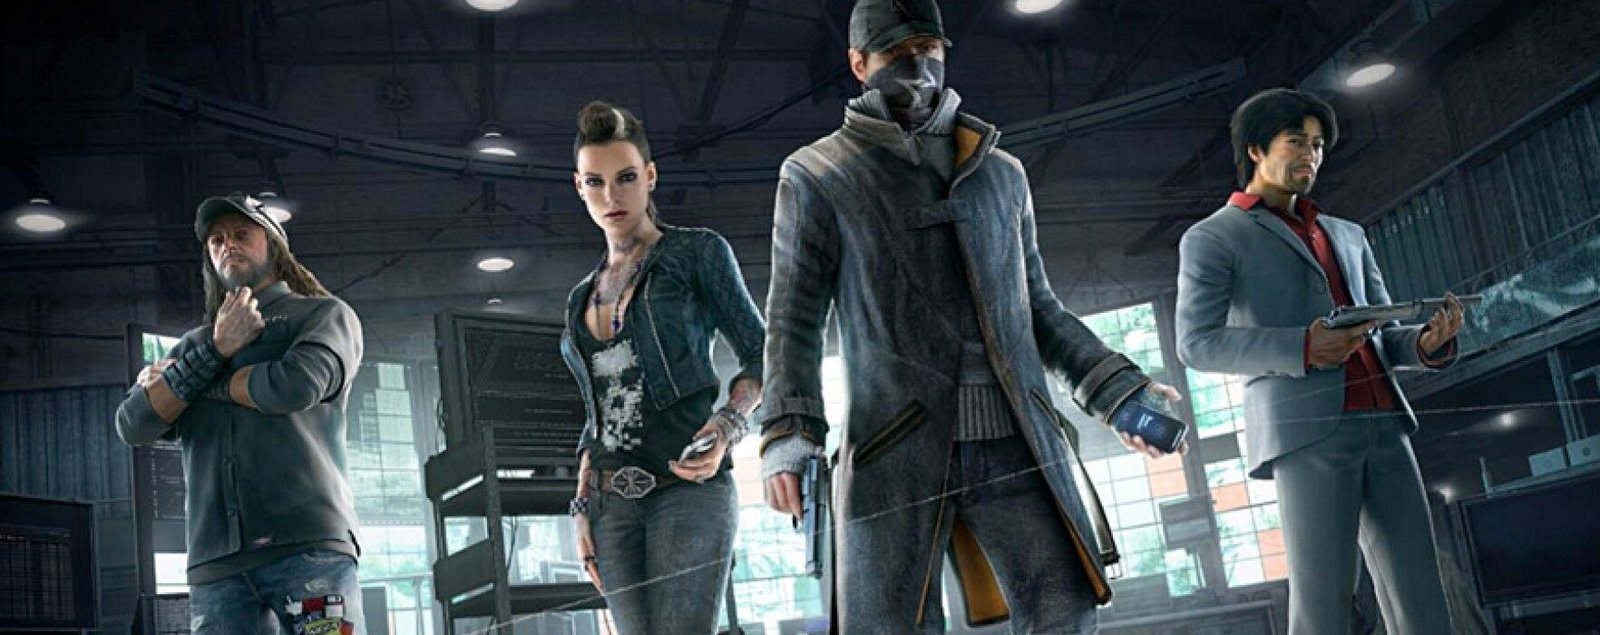 watch-dogs-character-trailer-1764x700-4